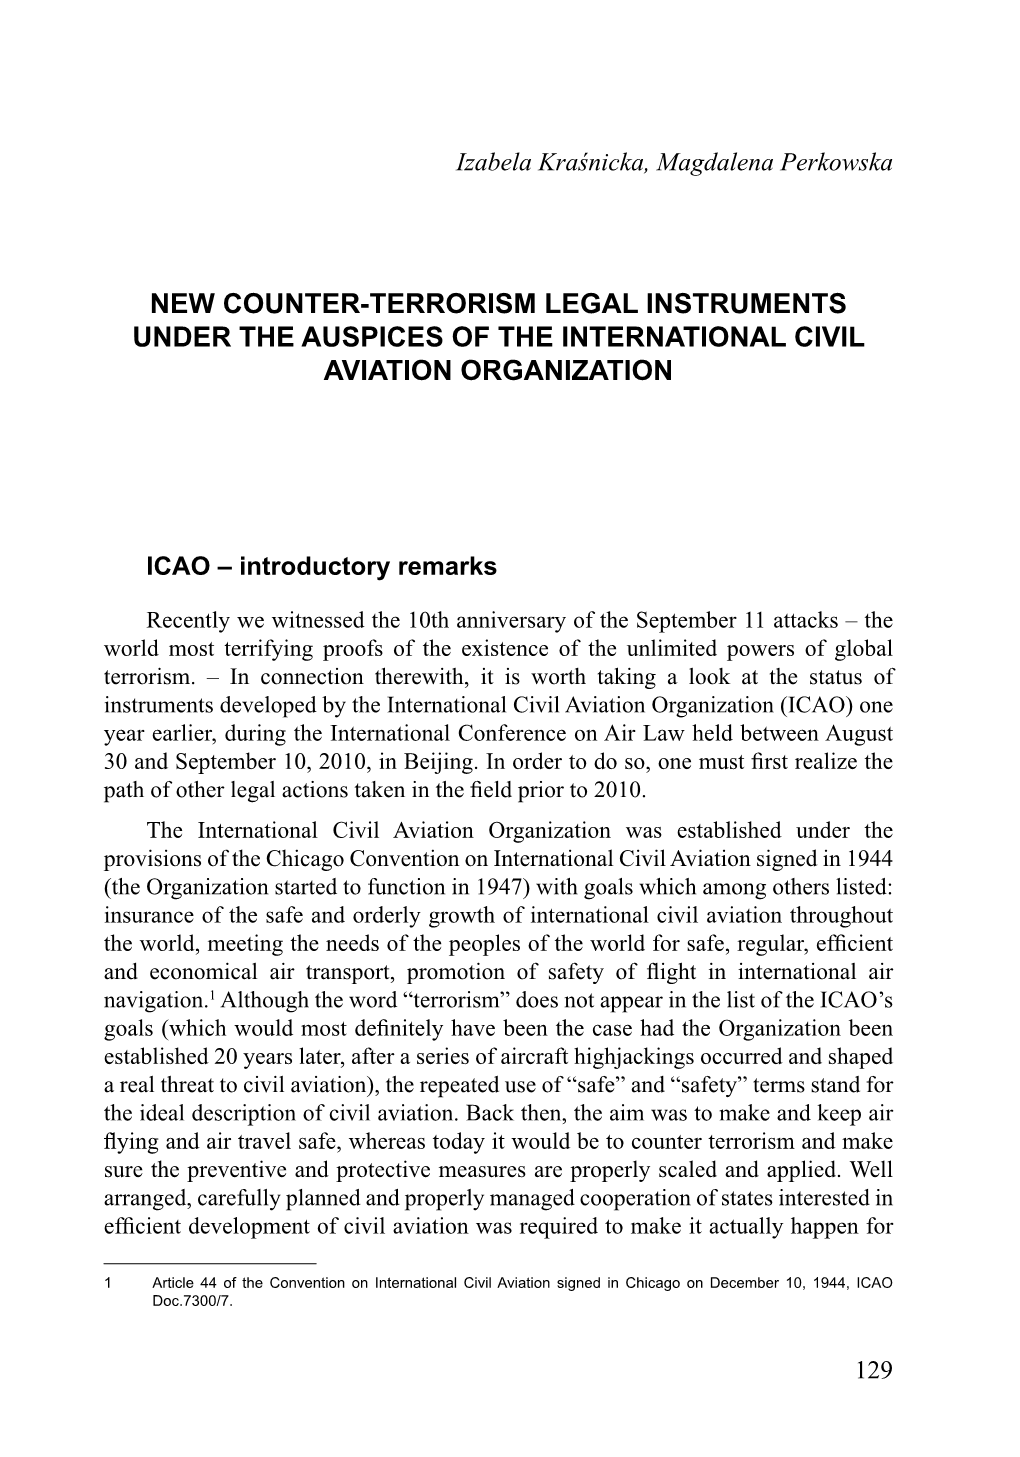 New Counter-Terrorism Legal Instruments Under the Auspices of the International Civil Aviation Organization